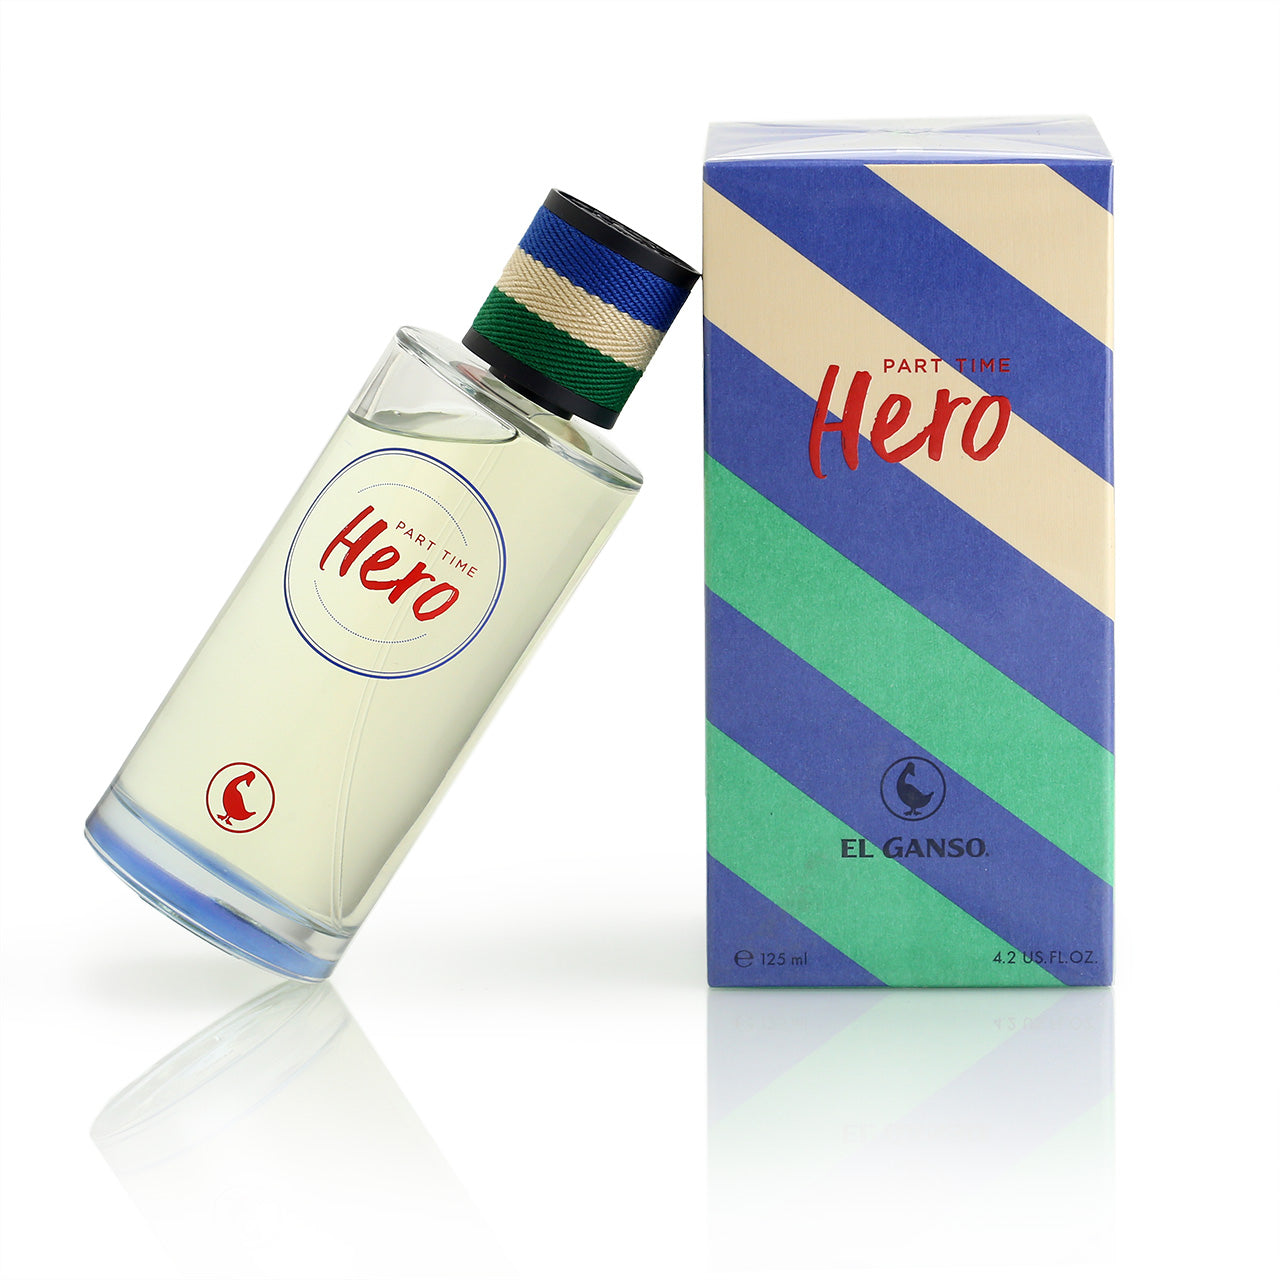 Part Time Herp EDT bottle with it's graphicly printed packaging